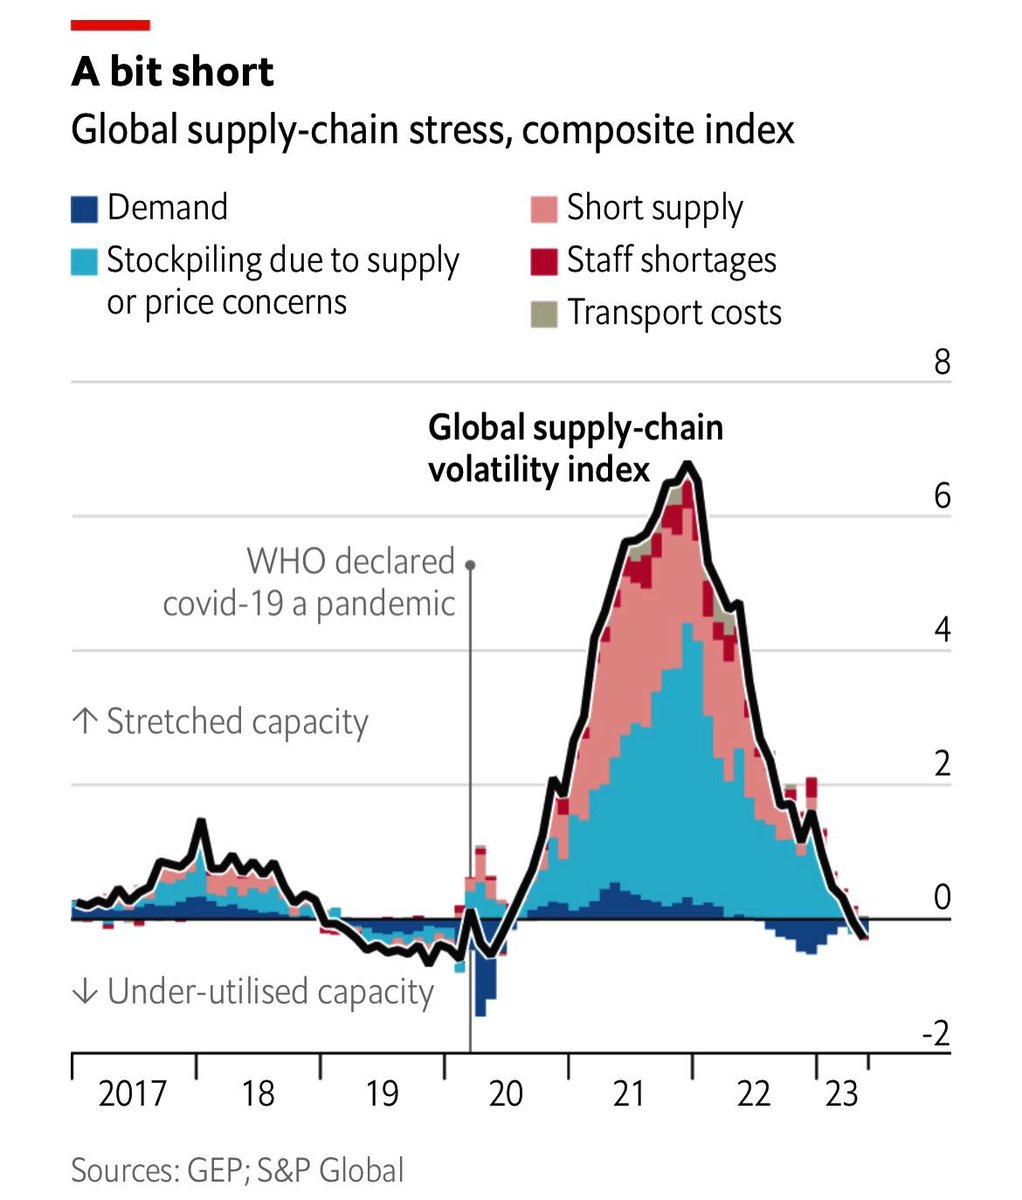 Is the global #supplychain crisis now over @ScottWLuton? #supplychains